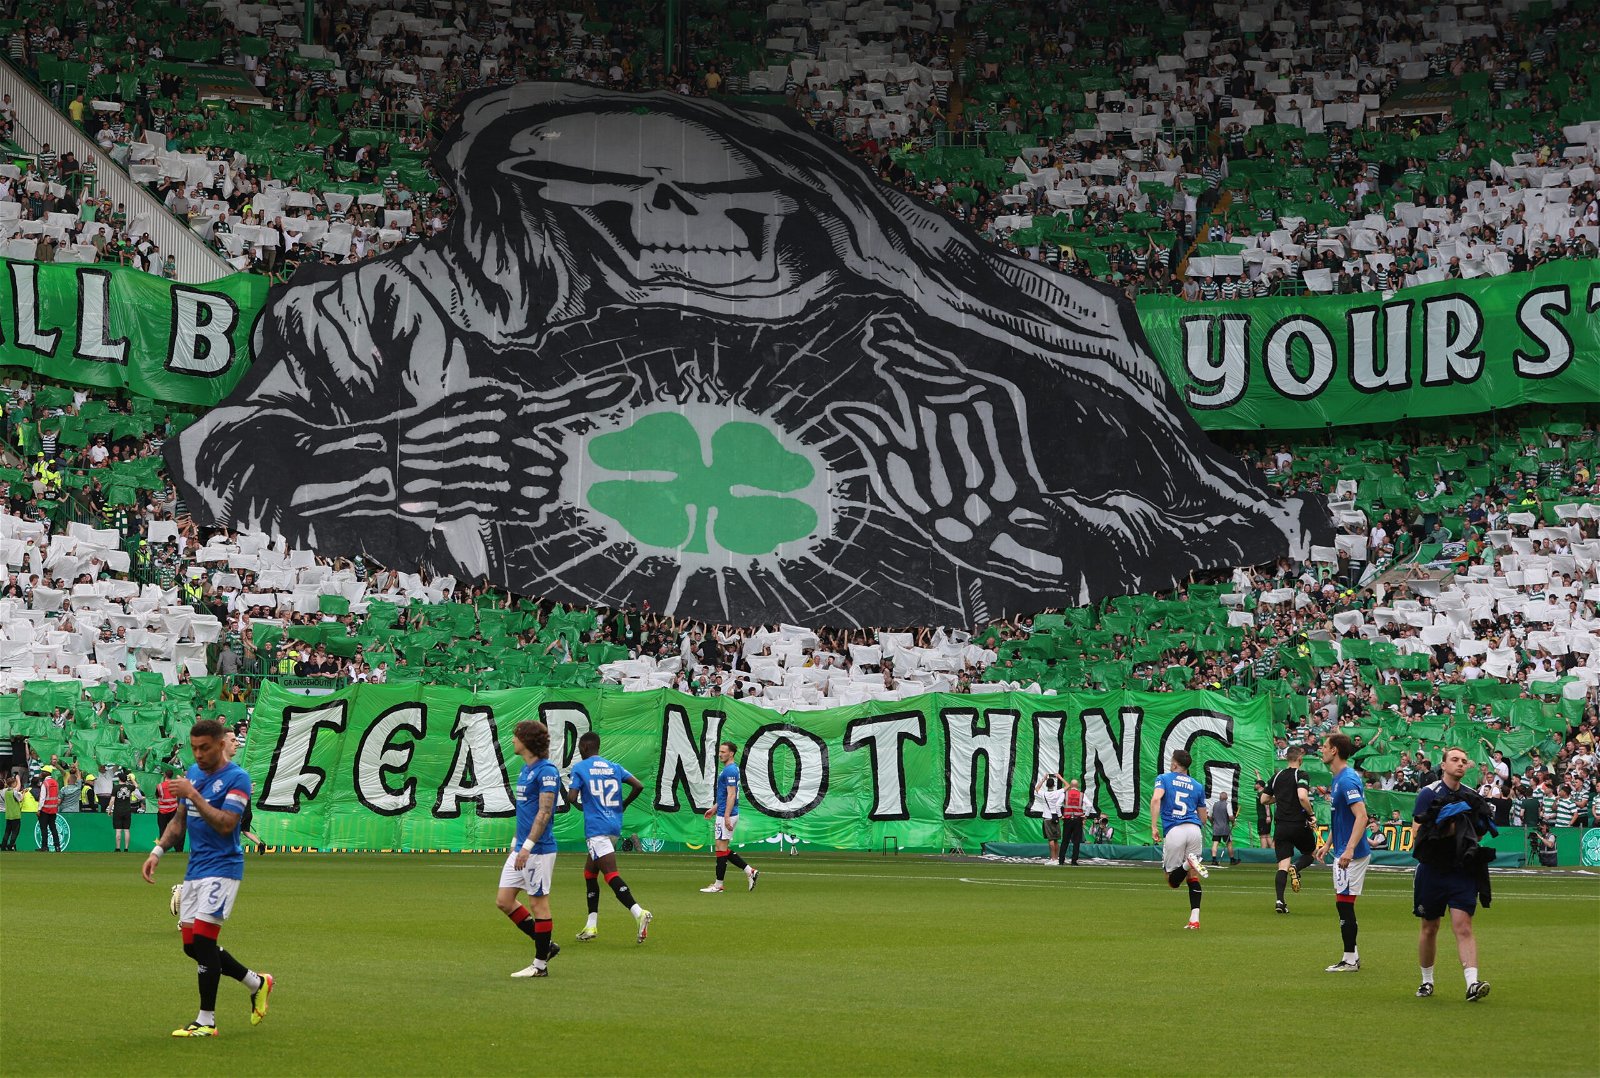 Celtic Can Neutralise The Lie Today And Set Next Season Up To Completely Shatter It.